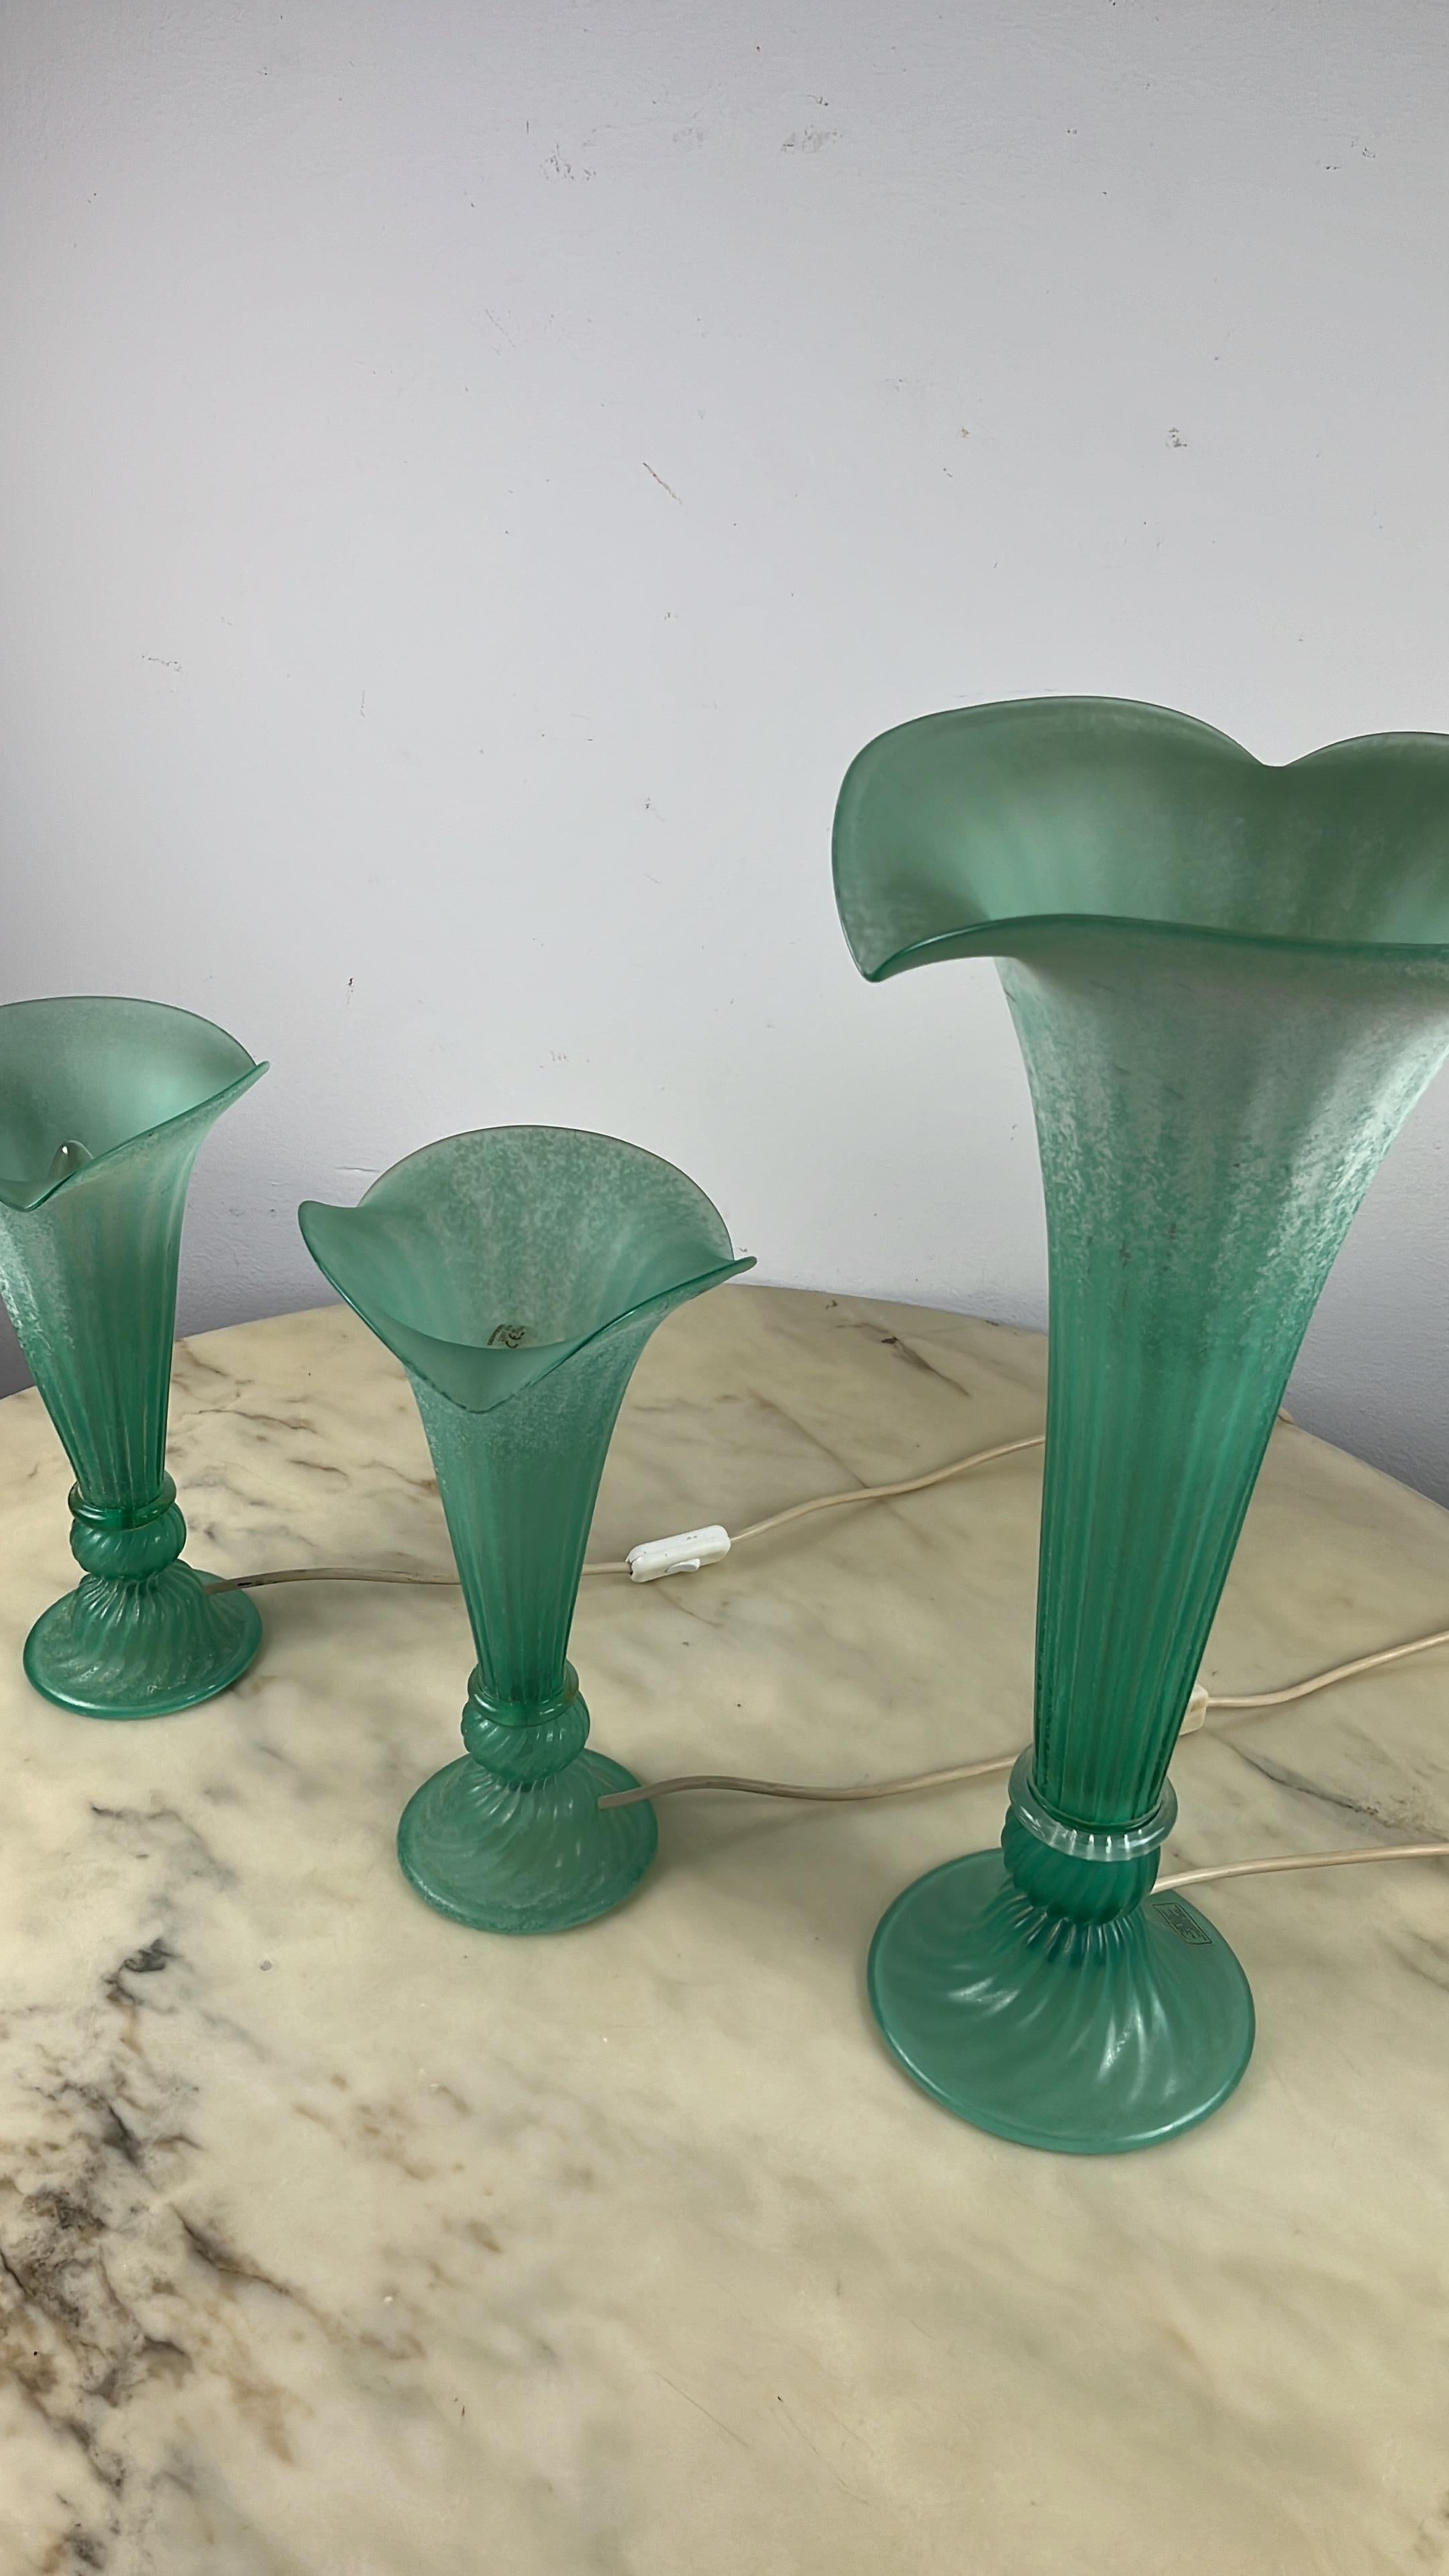 Set of 3 green Murano glass lamps, Italy, 1980s.
The large one is 53 cm high and measures 27 cm in the widest part. The two smaller ones are 33 cm high and measure 18.5 cm in the widest part.
They are shaped like flowers. Intact, working and in